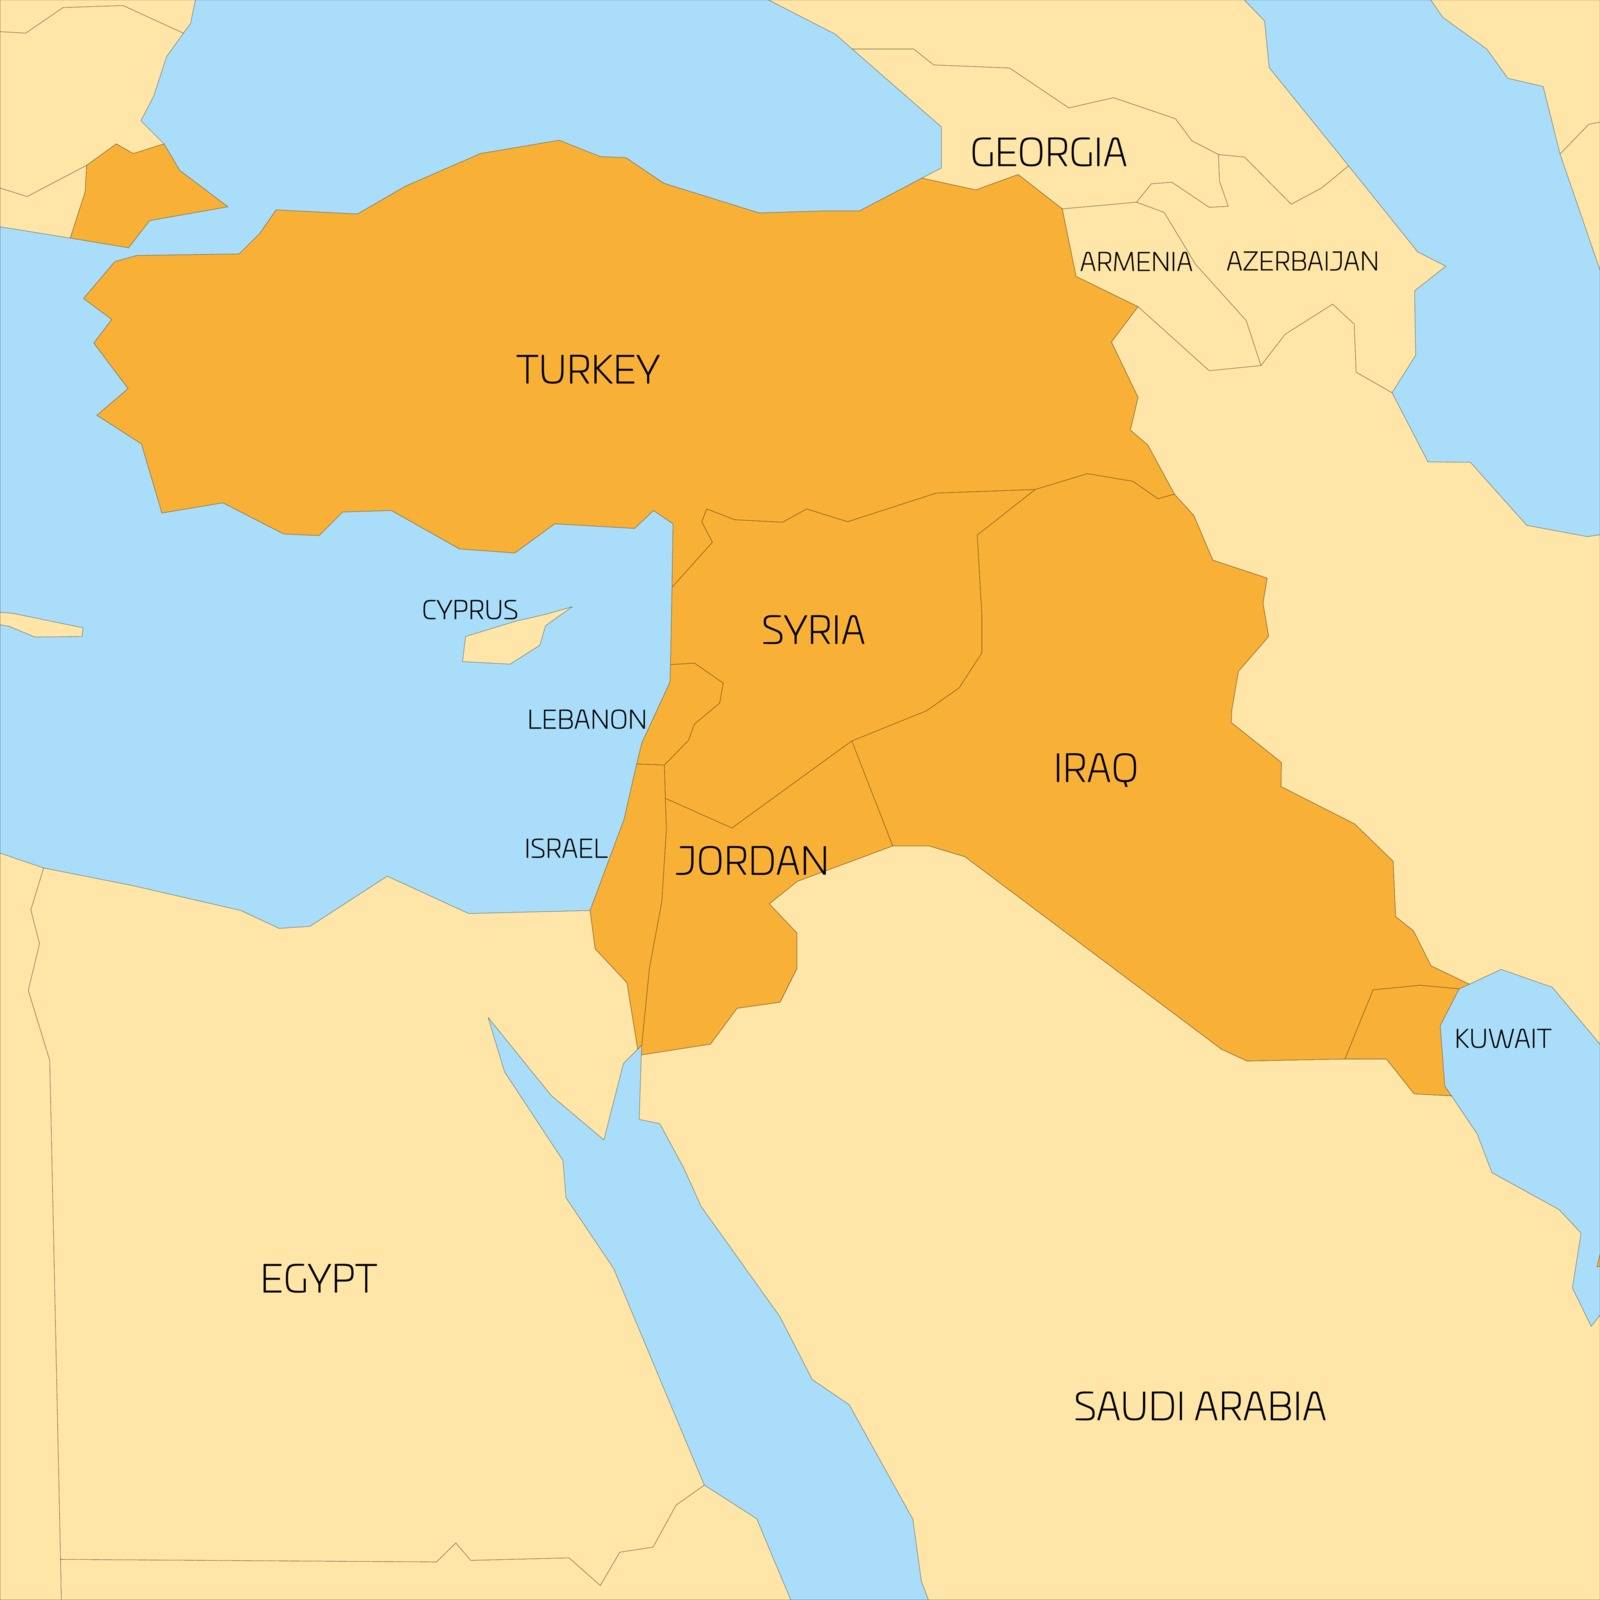 Map of Middle East region by pyty